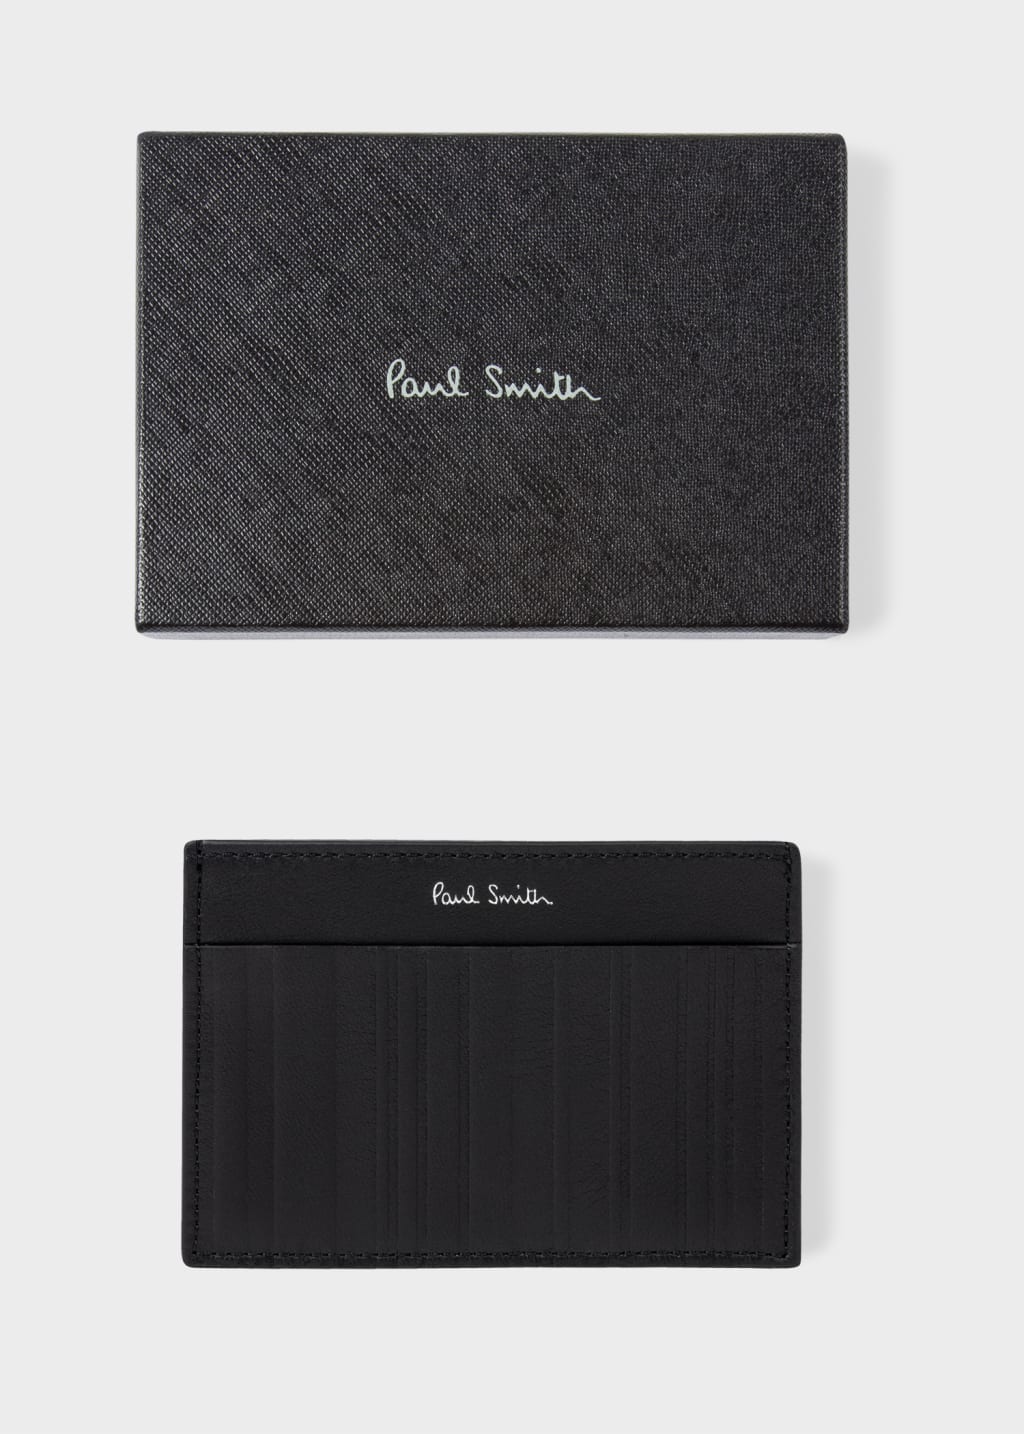 Detail View - Black Leather 'Shadow Stripe' Credit Card Holder Paul Smith